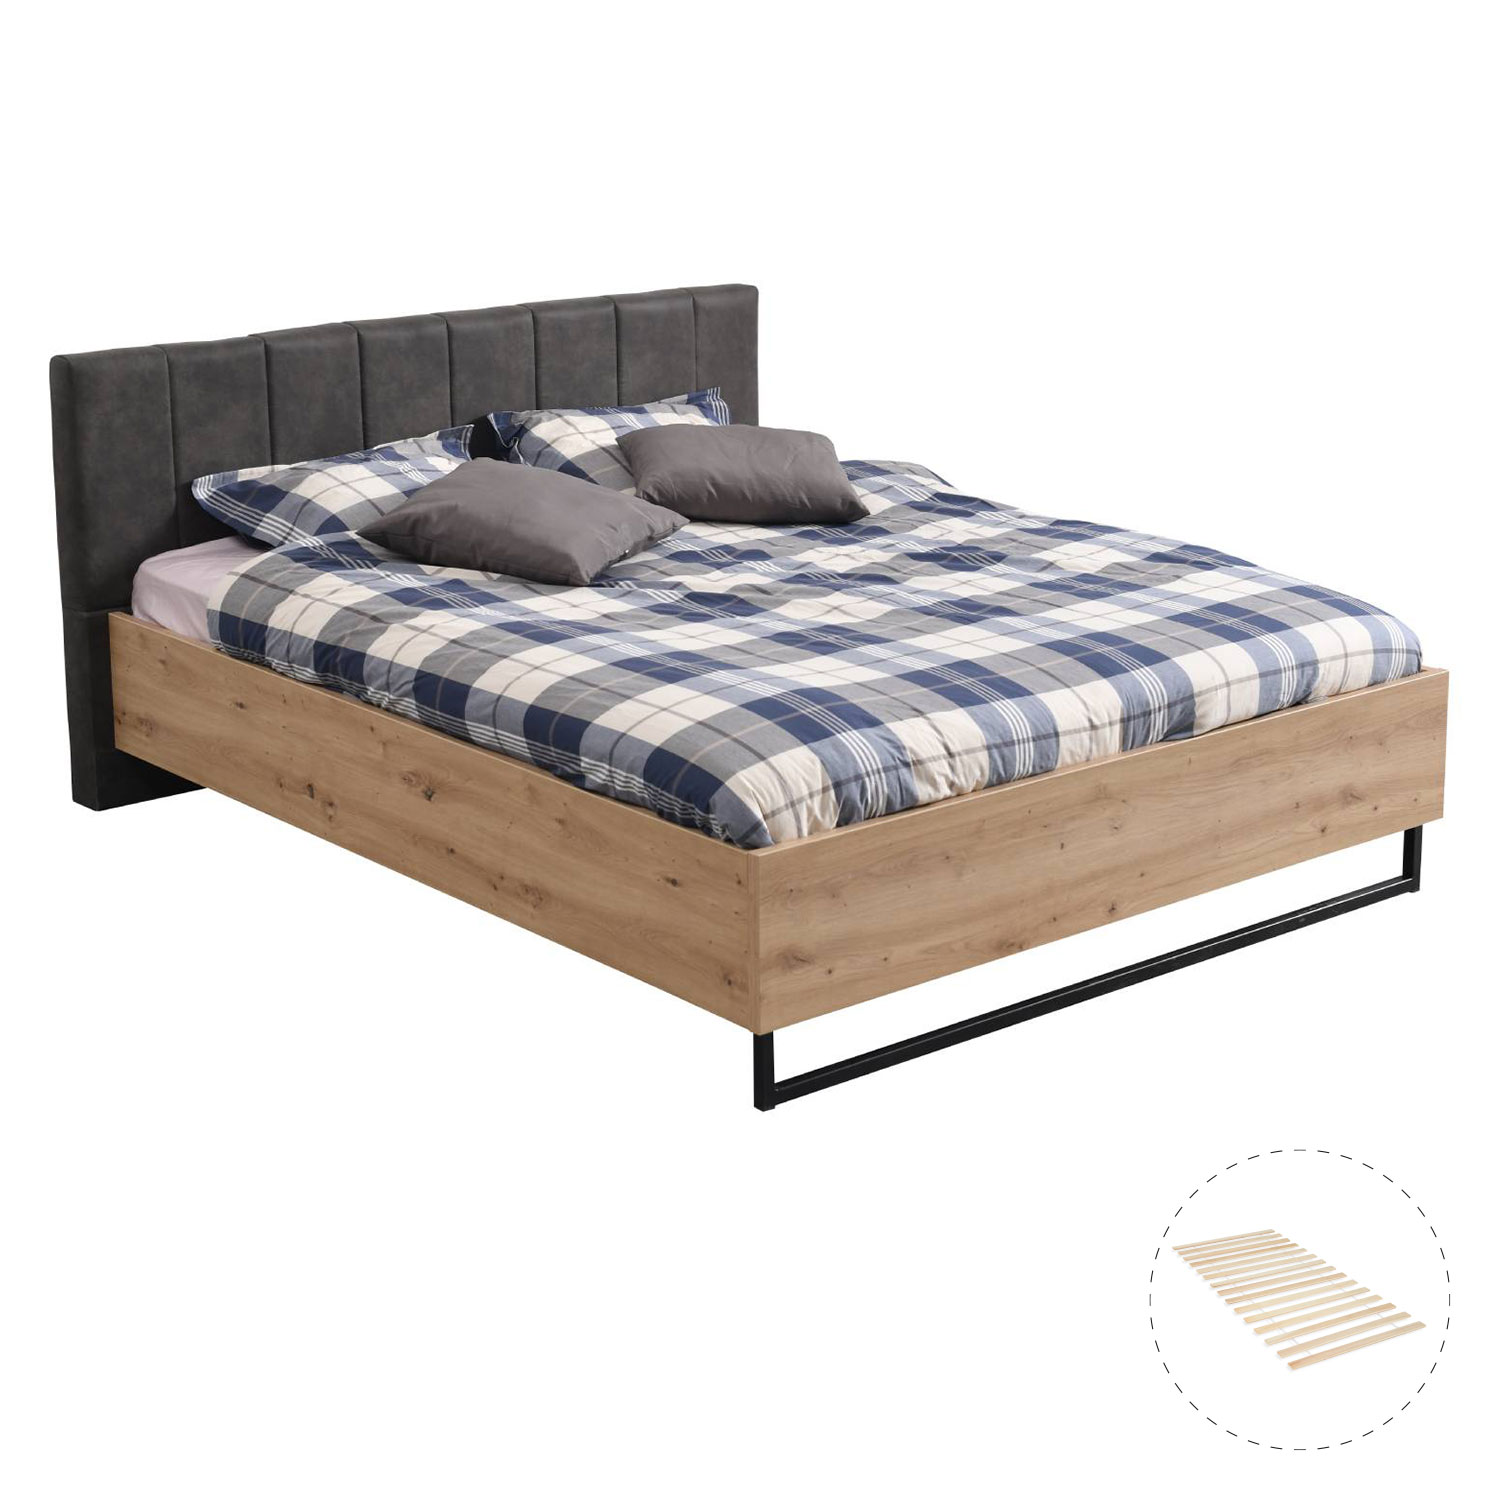 Double Bed Wooden Frame Upholstered Bed 160x200 cm with Slats Grey Fabric Oak Industrial Style